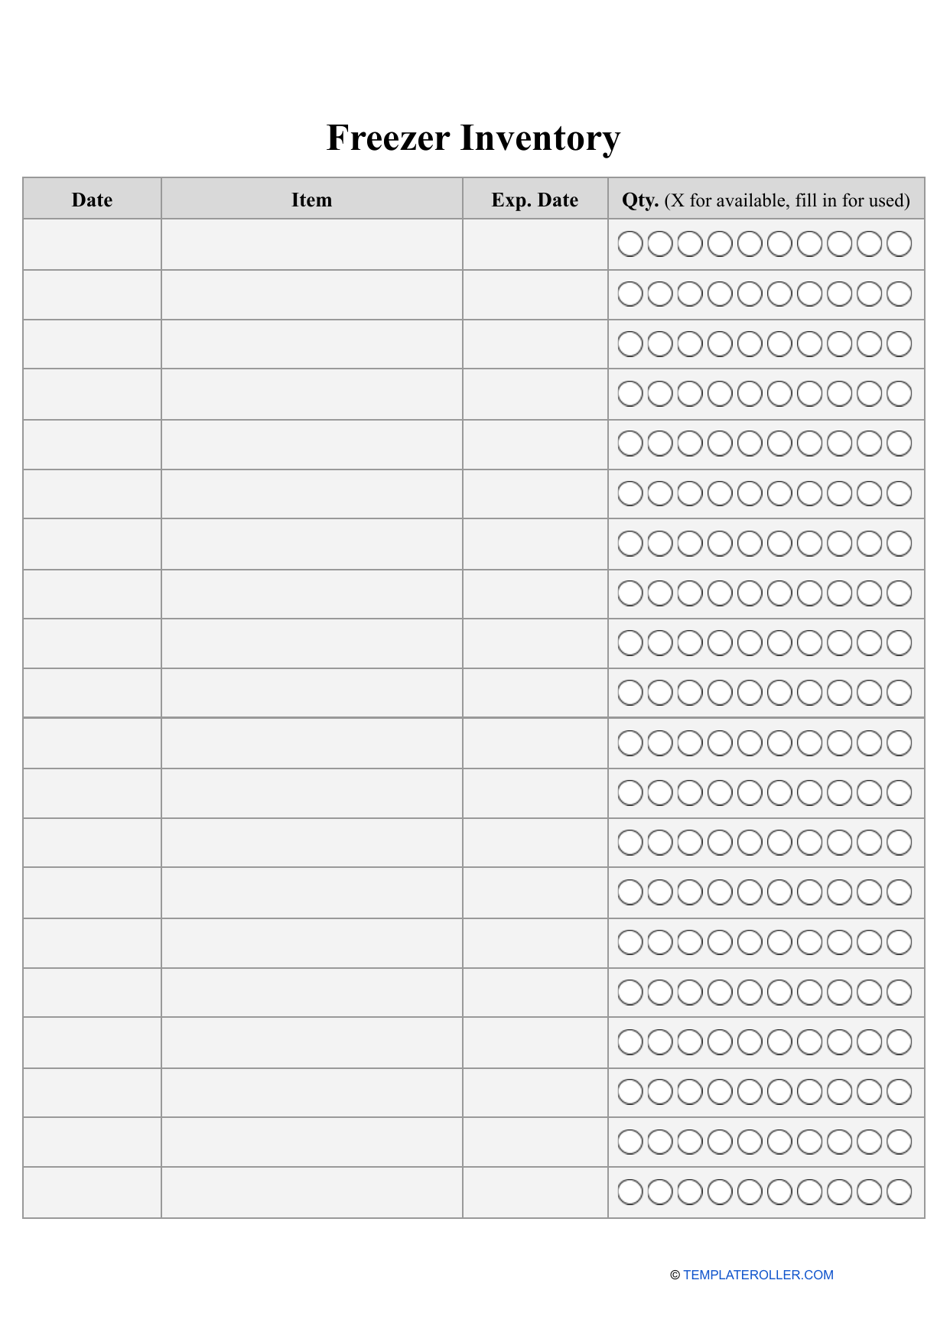 Freezer Inventory Template, Page 1